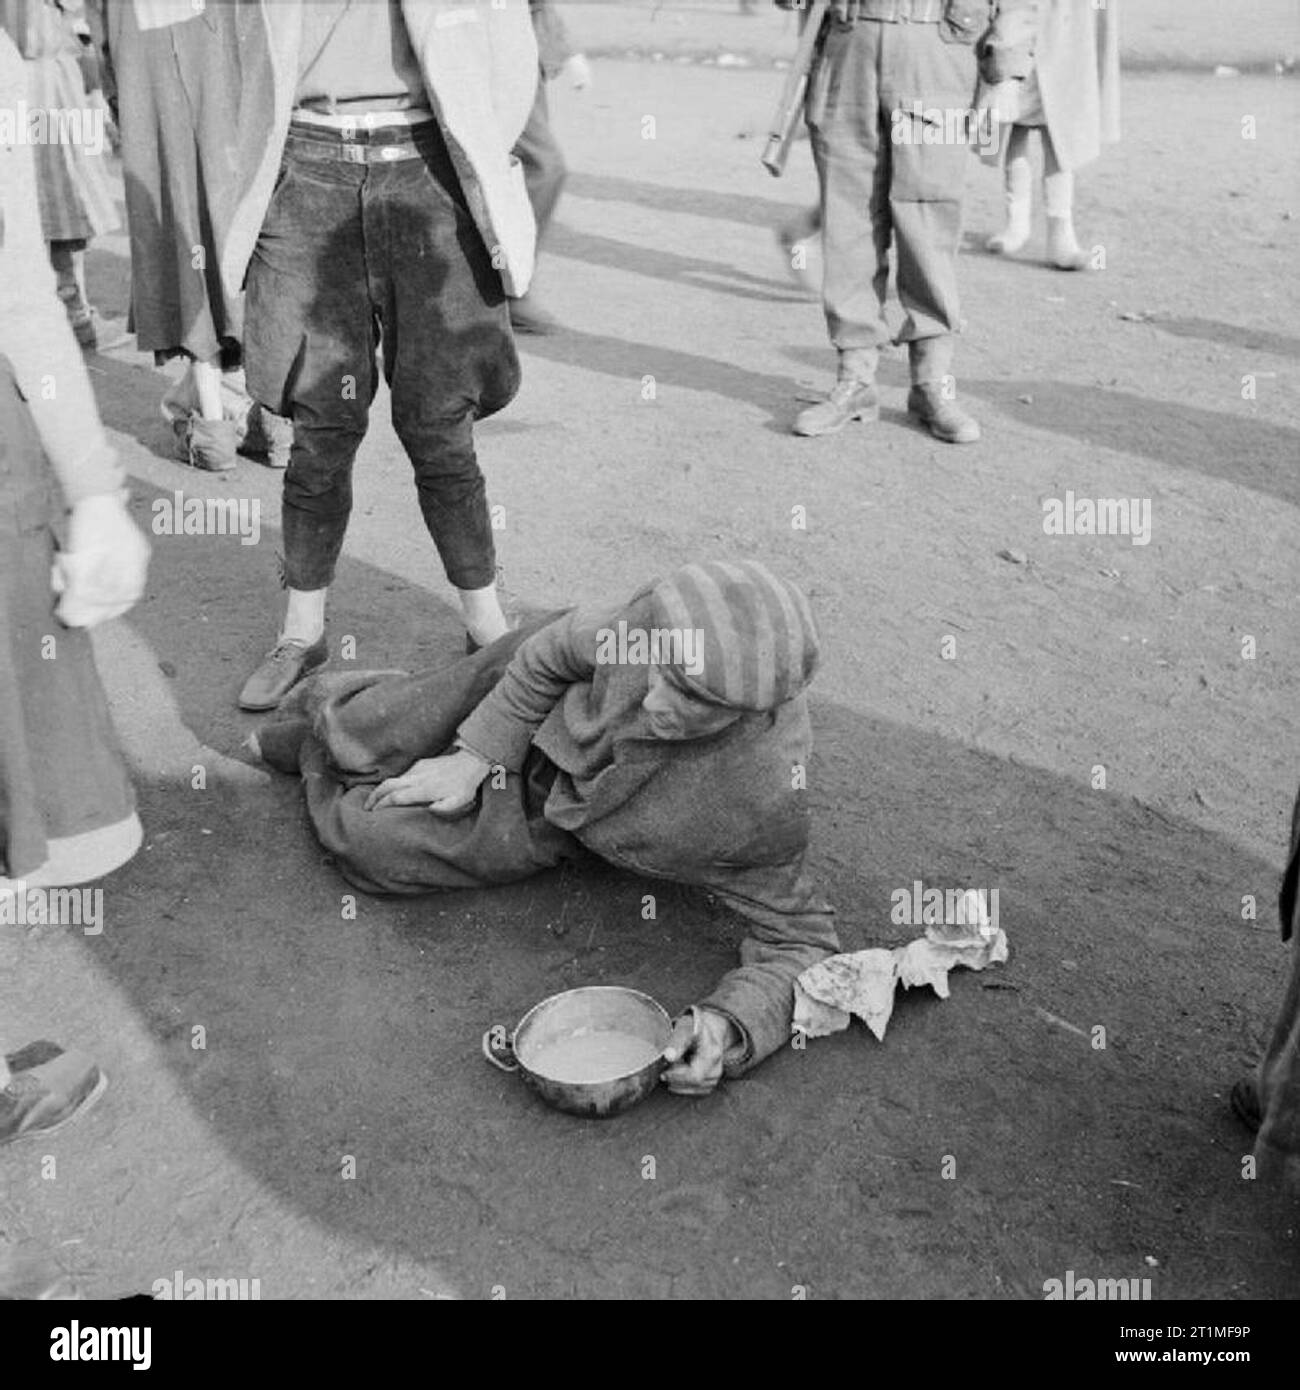 The Liberation of Bergen-belsen Concentration Camp, April 1945 An inmate, too weak to stand, struggles to drink some soup brought to him by one of the women camp inmates. Stock Photo